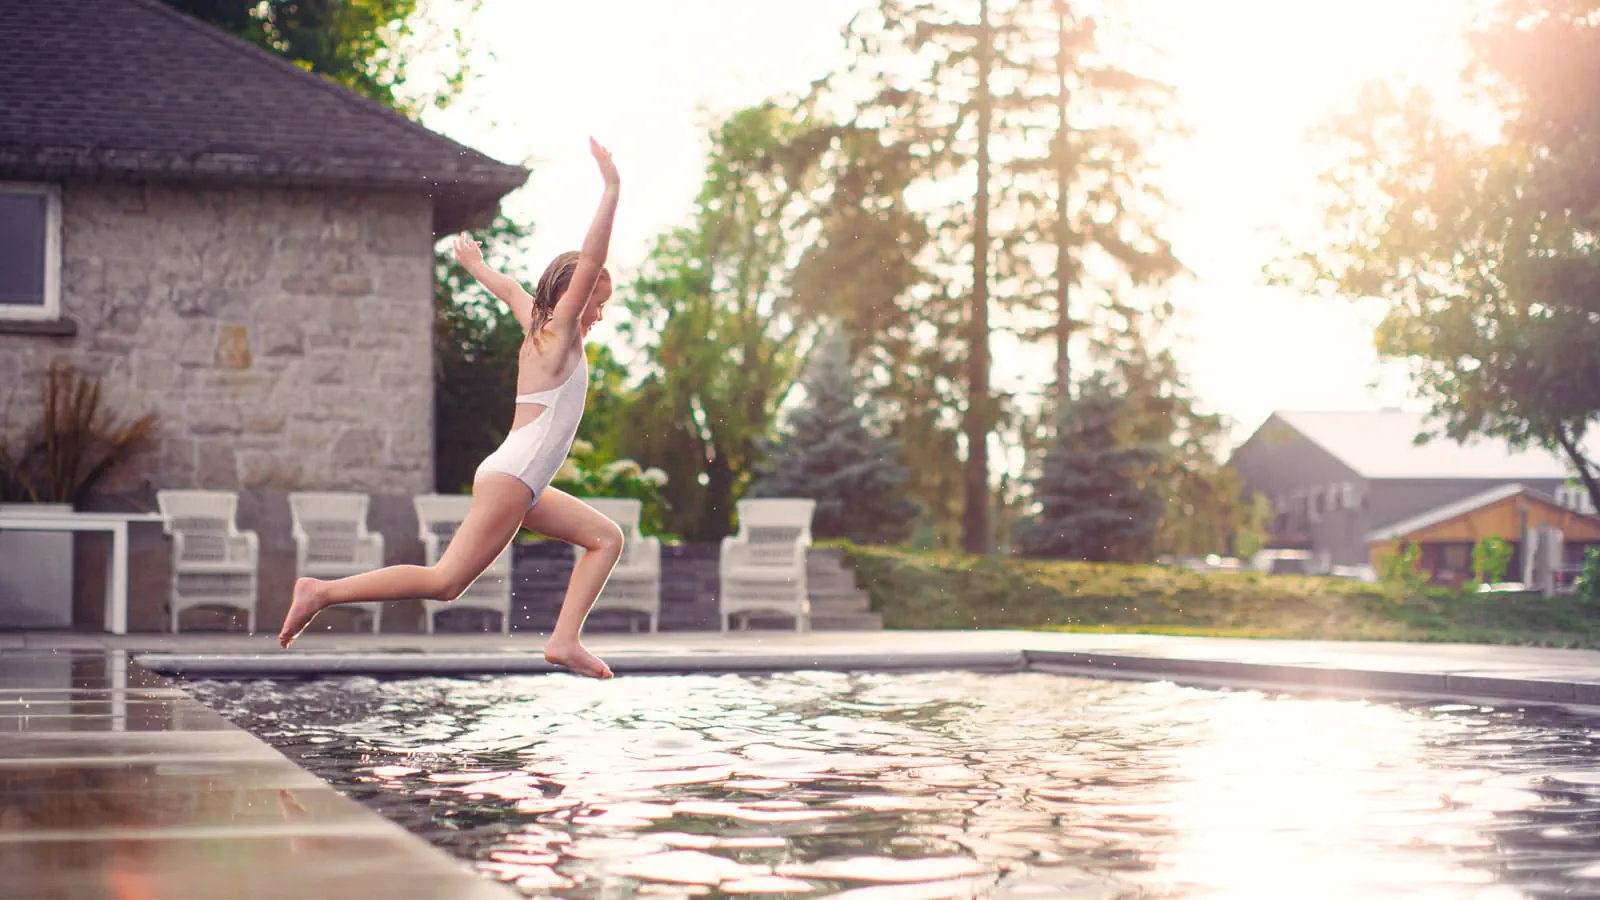 young girl jumping in a fiberglass inground swimming pool manufactured by Leisure Pools